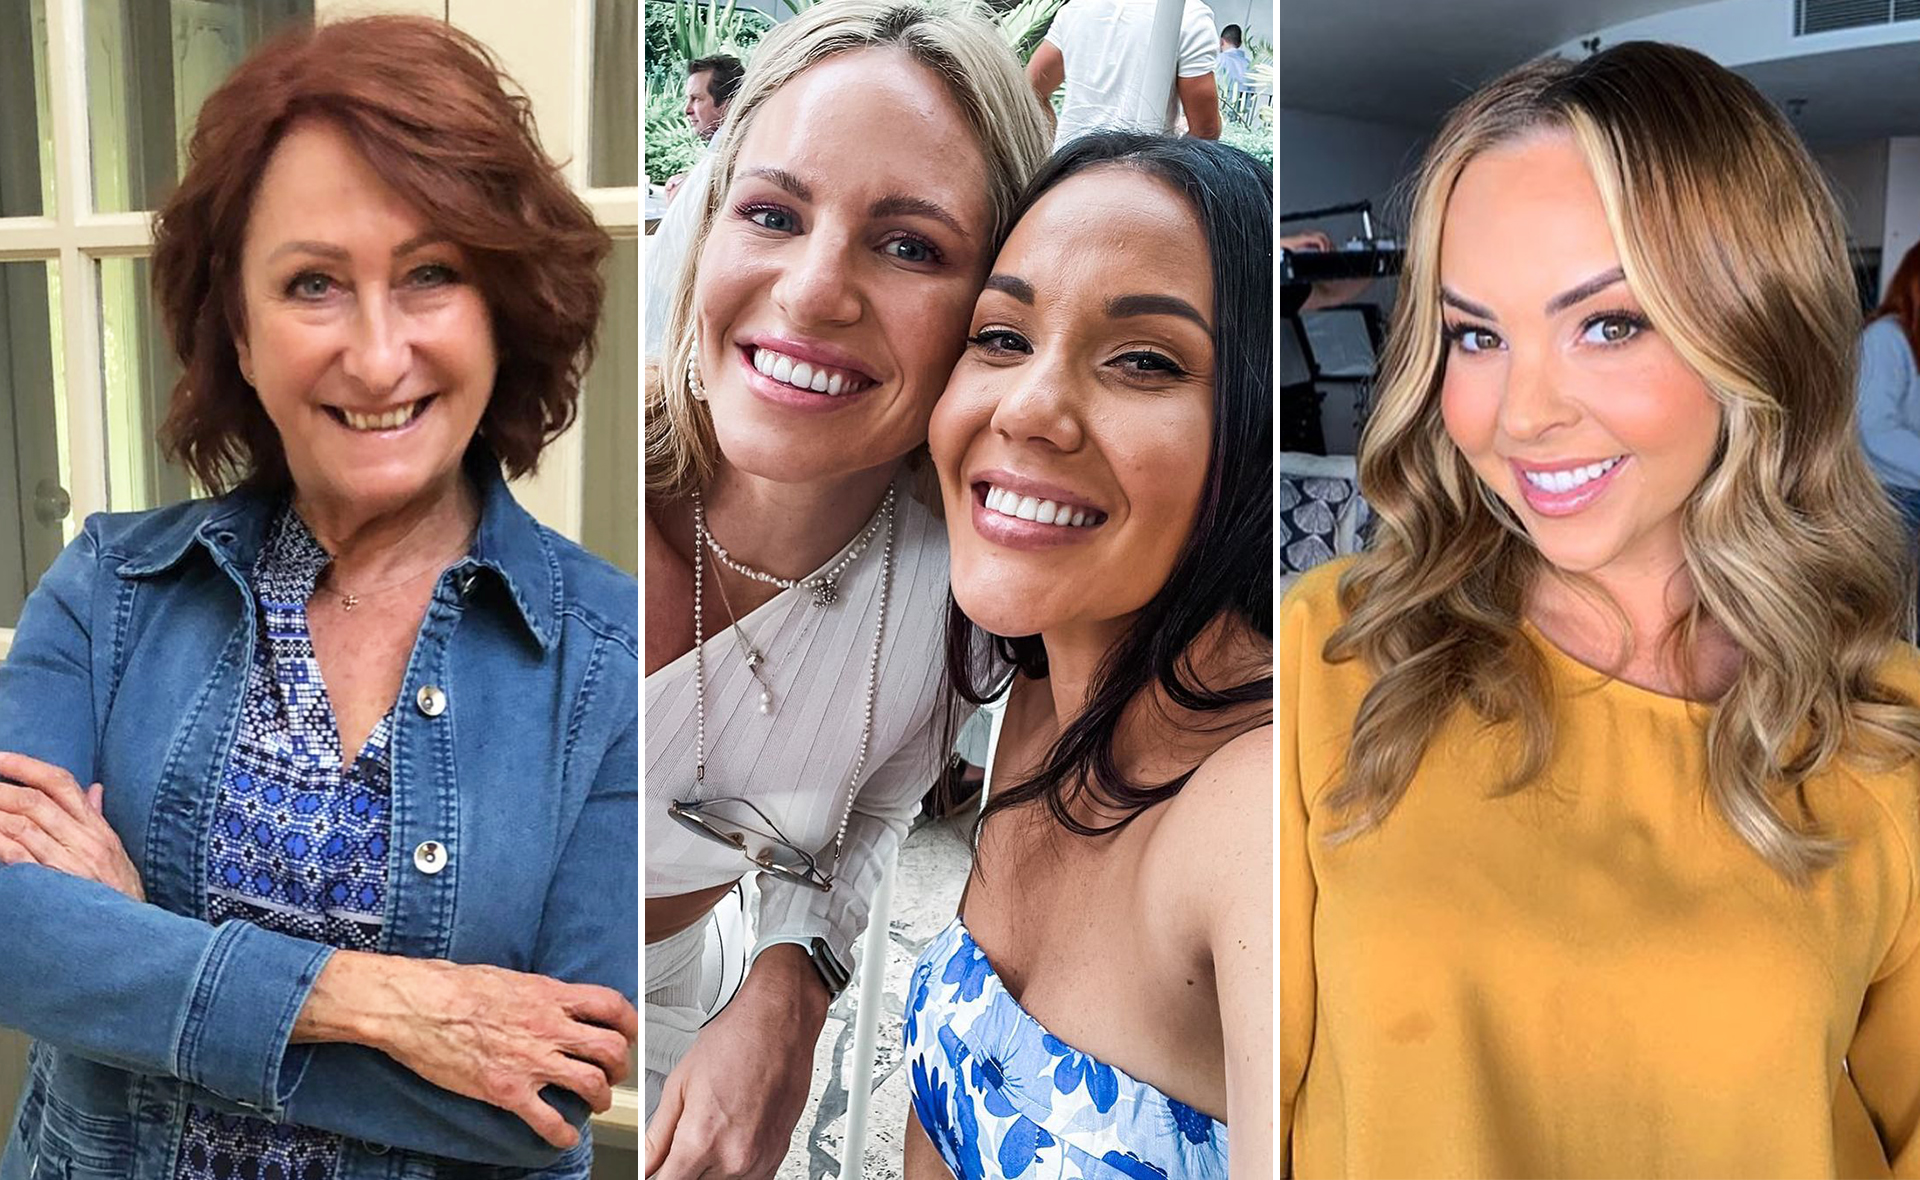 Emily Seebohm, Lynne McGranger and more Aussie celebs prove that we’re not done talking about eating disorders